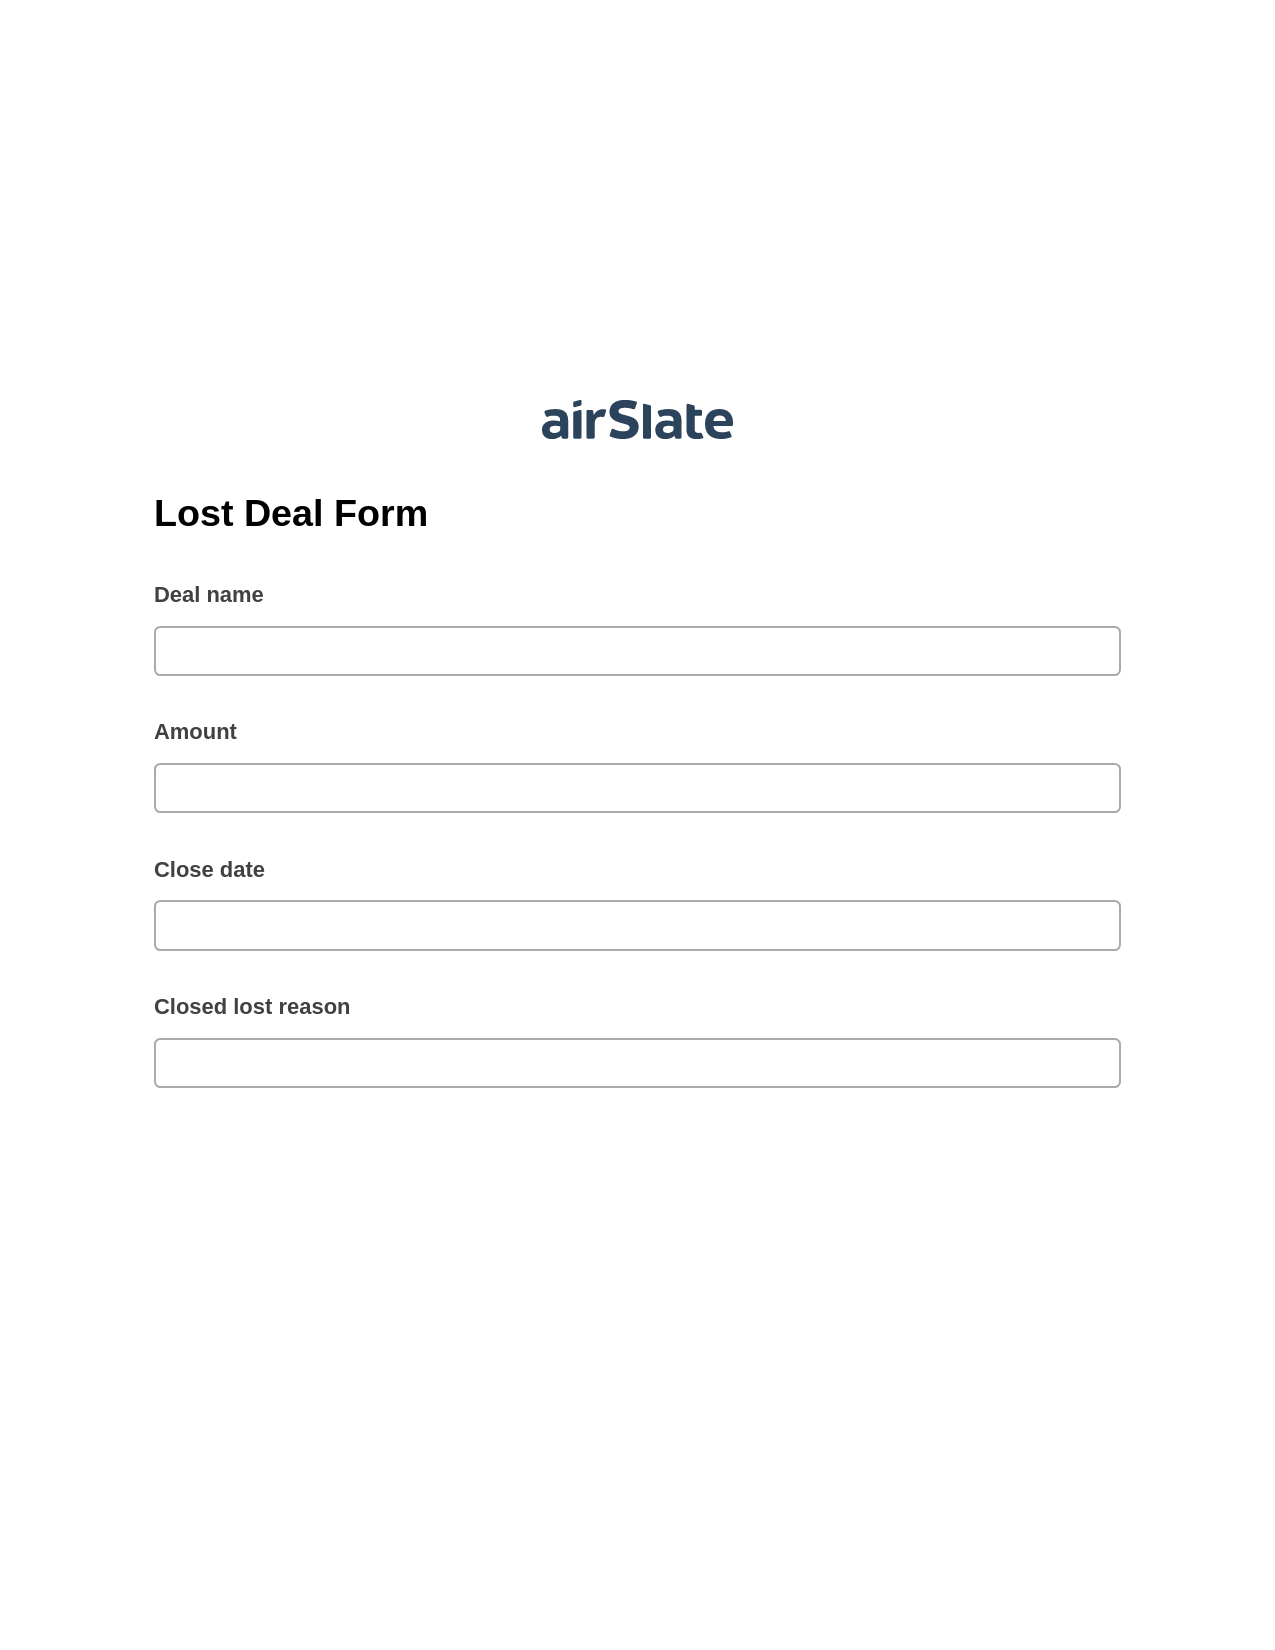 Lost Deal Form Pre-fill from CSV File Bot, Remove Slate Bot, Post-finish Document Bot